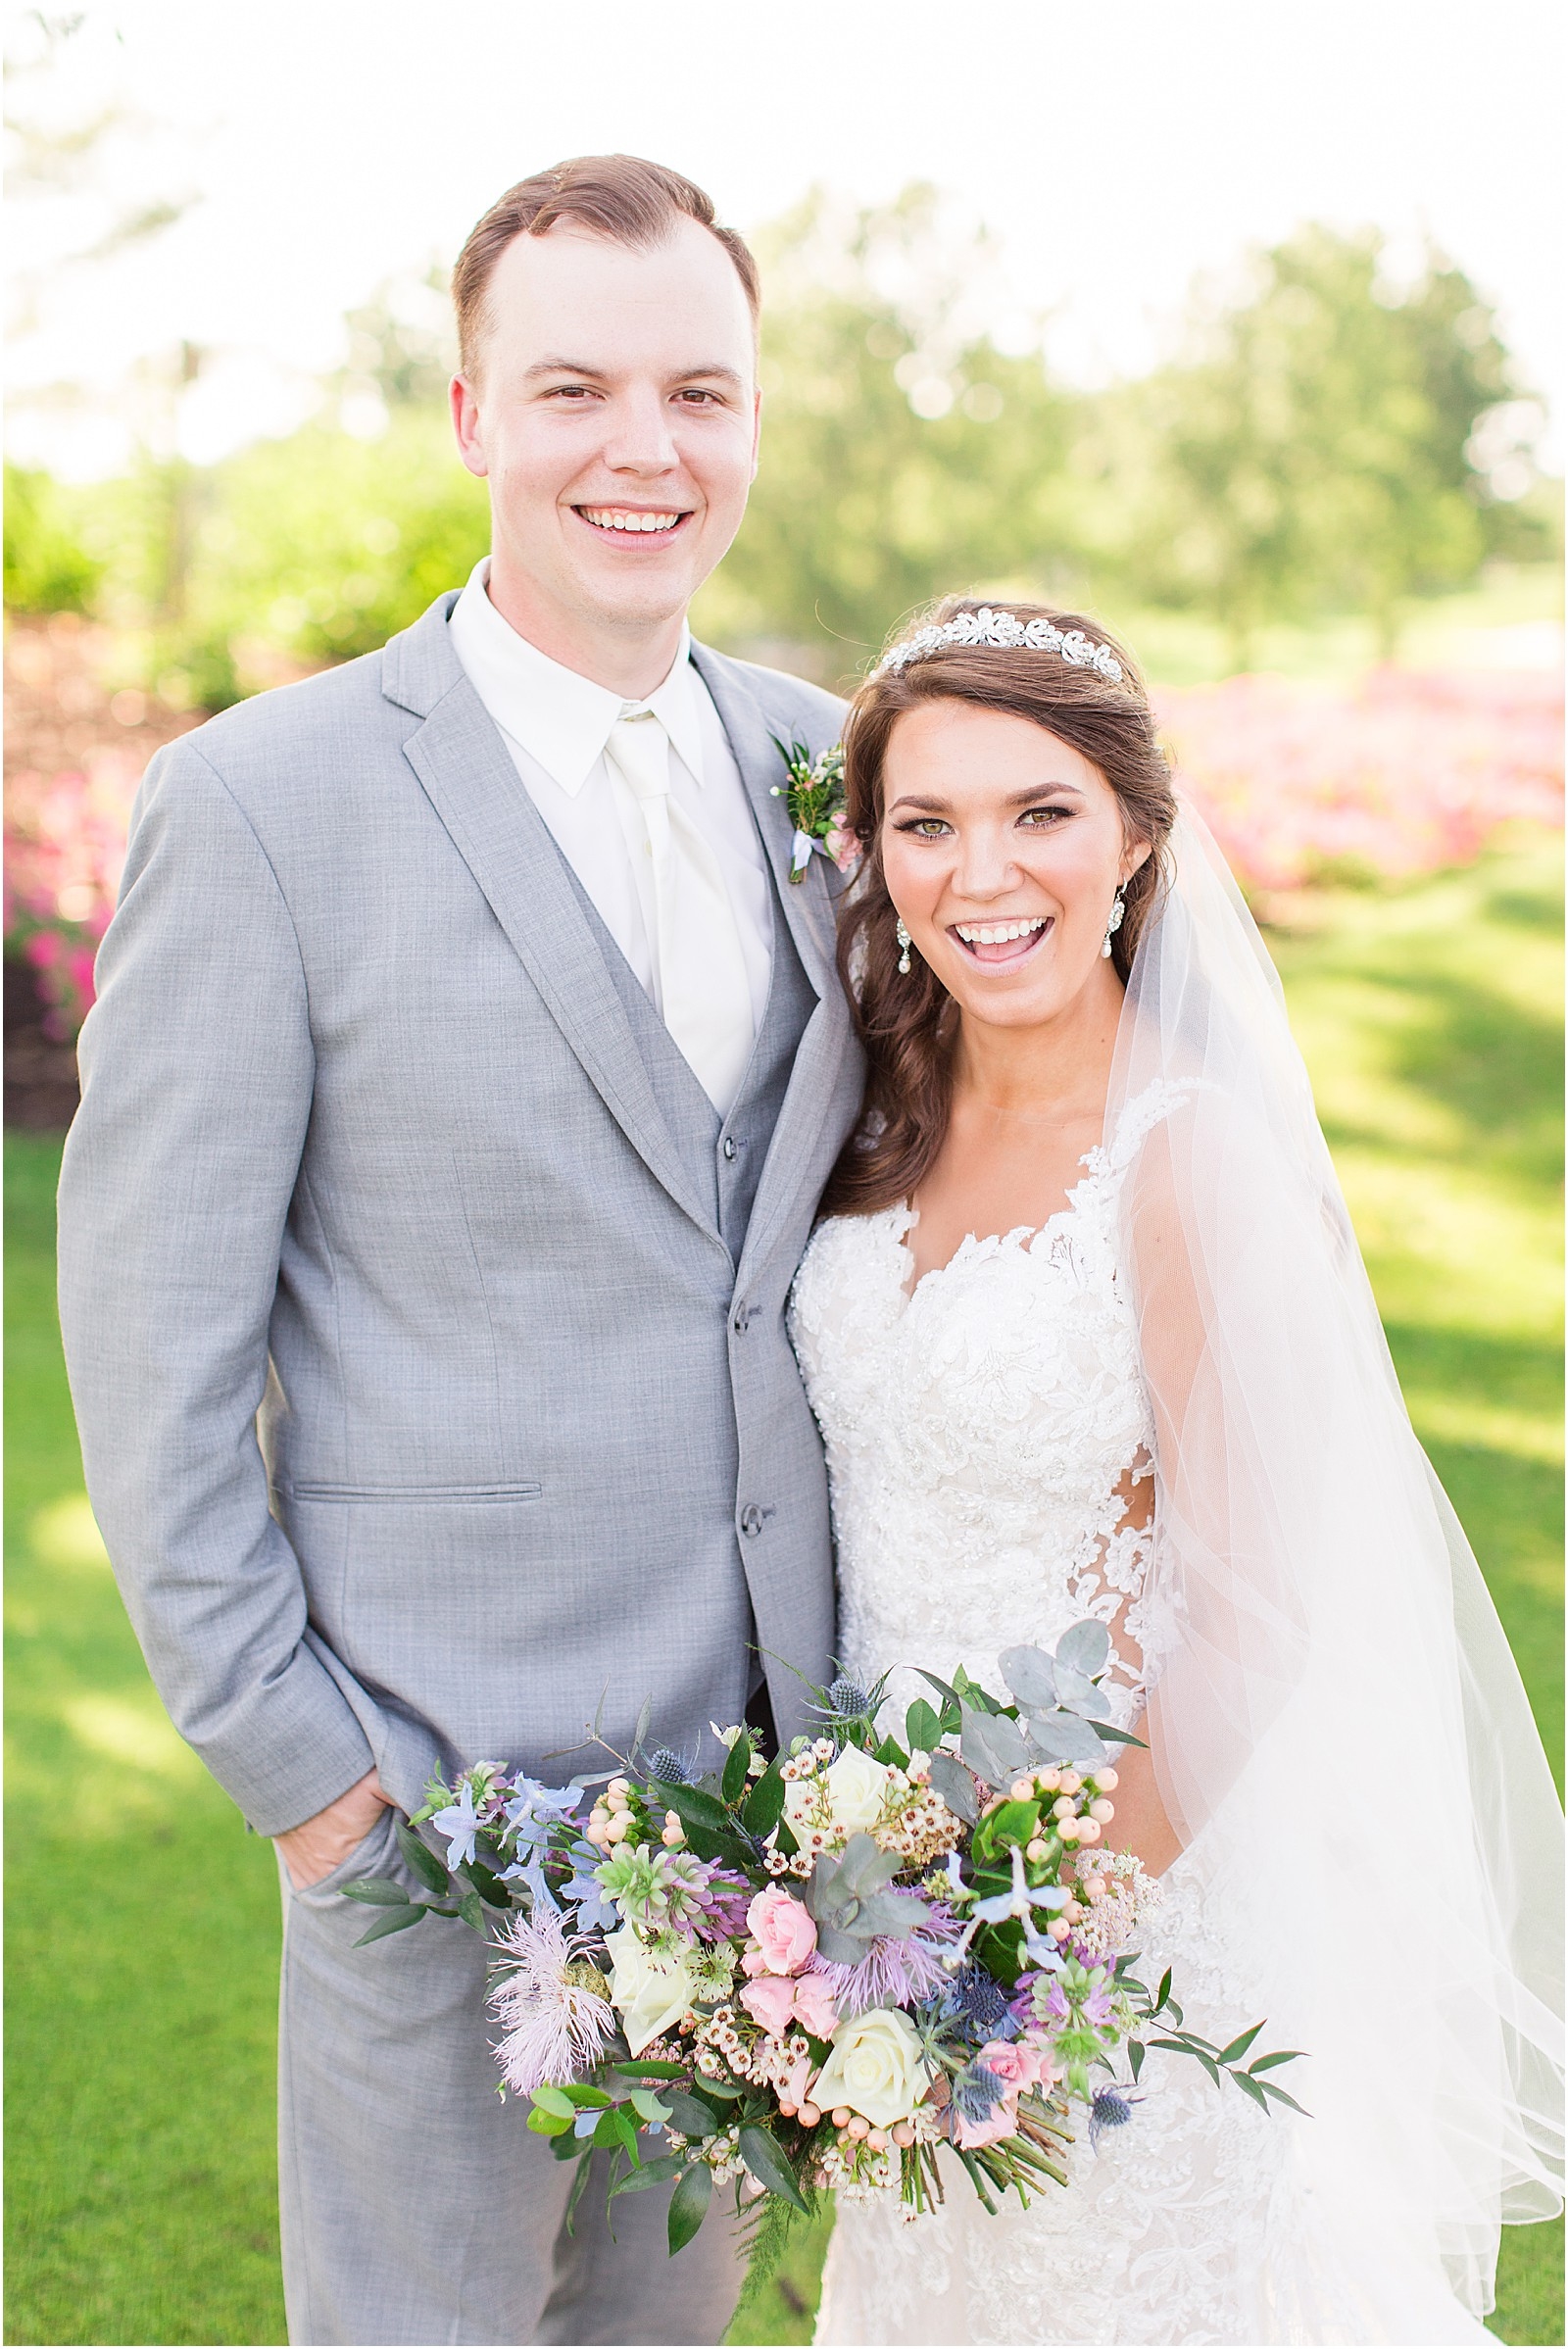 An Evansville County Club Wedding | Abby and Stratton 104.jpg